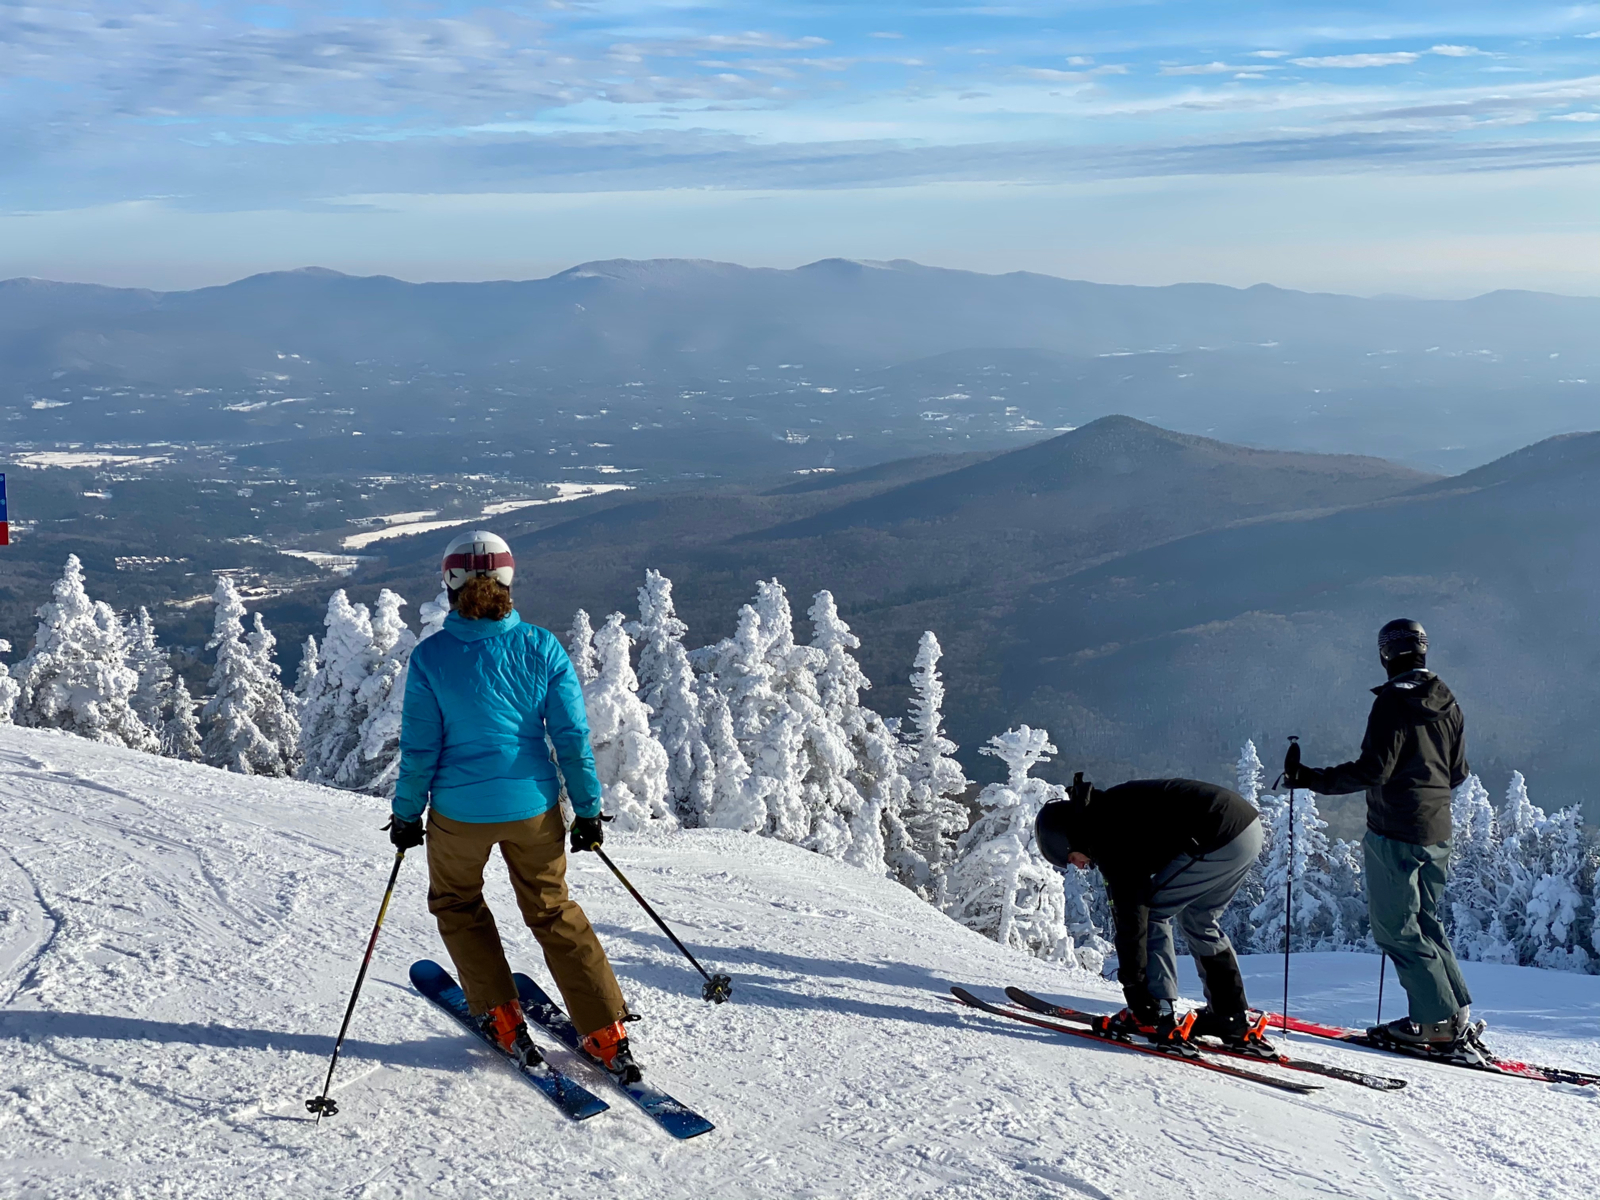 Skiers ready to ski down a mountain at one of the best places to visit in Vermont, Stowe